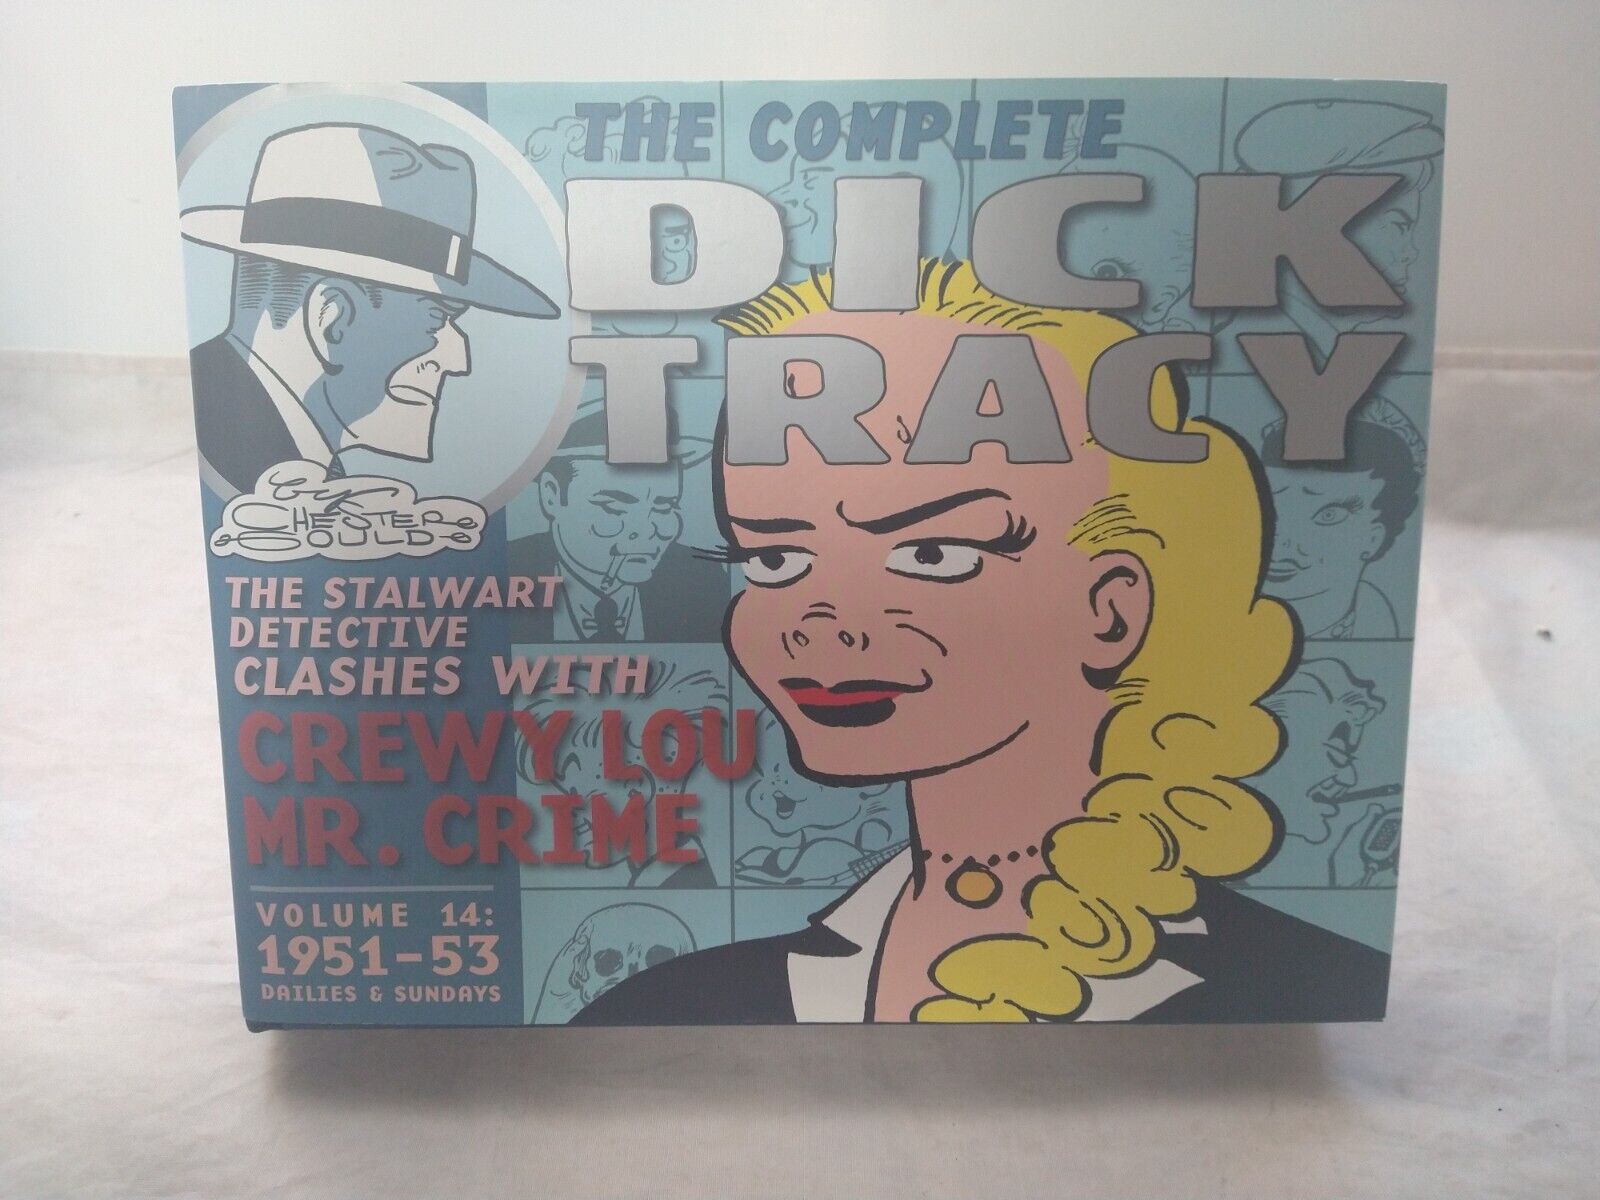 The Complete Dick Tracy Volume 14: 1951-53 Dailies & Sundays IDW Publishing